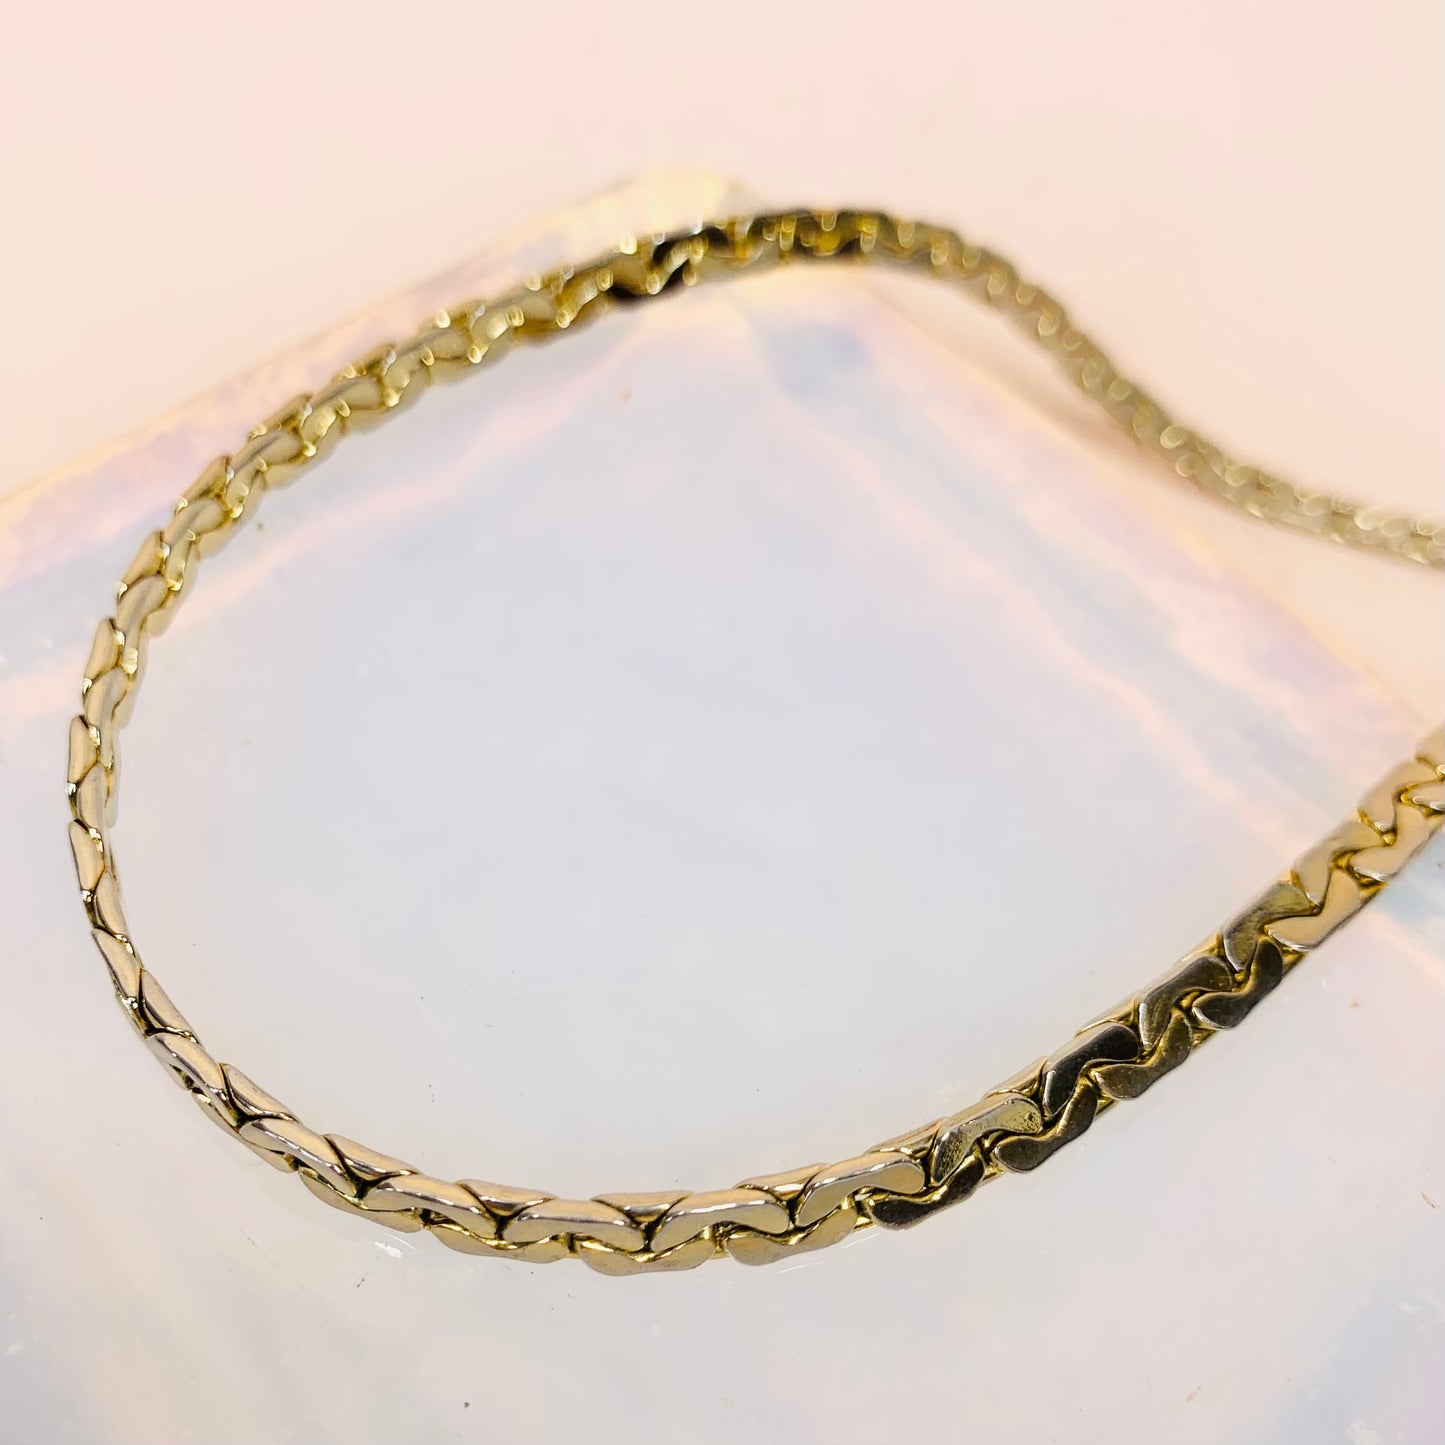 Extremely rare 1970s Artisan ultra rolled gold long chain